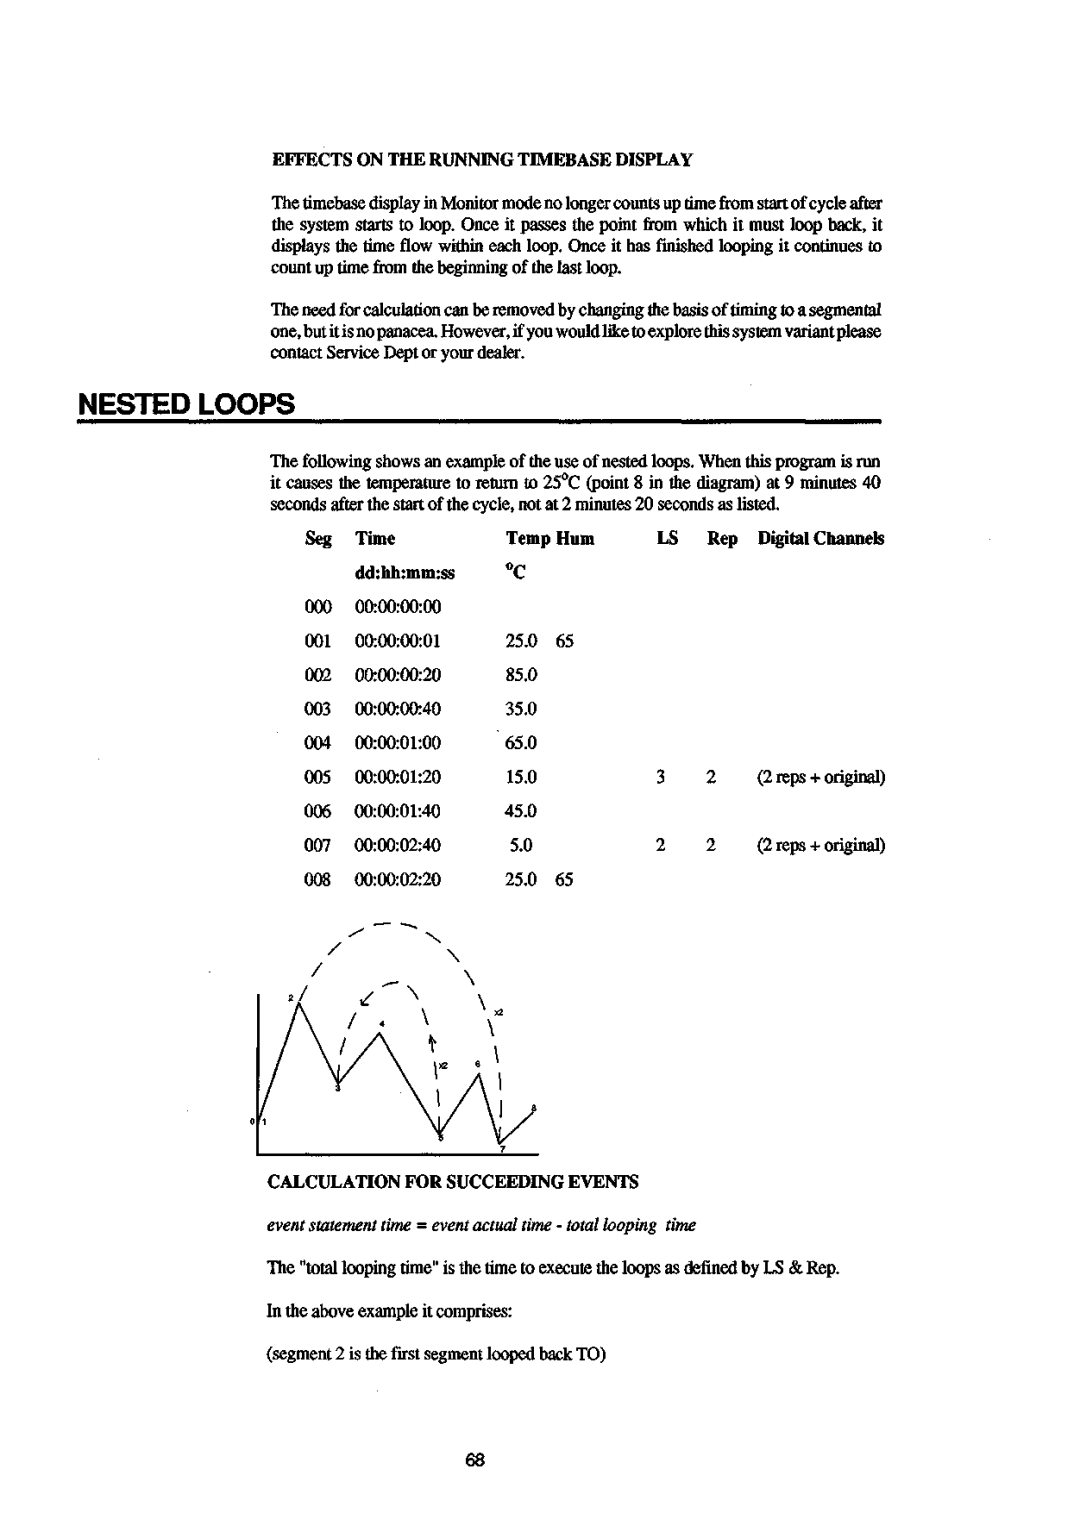 Sanyo 550 instruction manual Nested Loops, Effects on the Running Timebase Display 